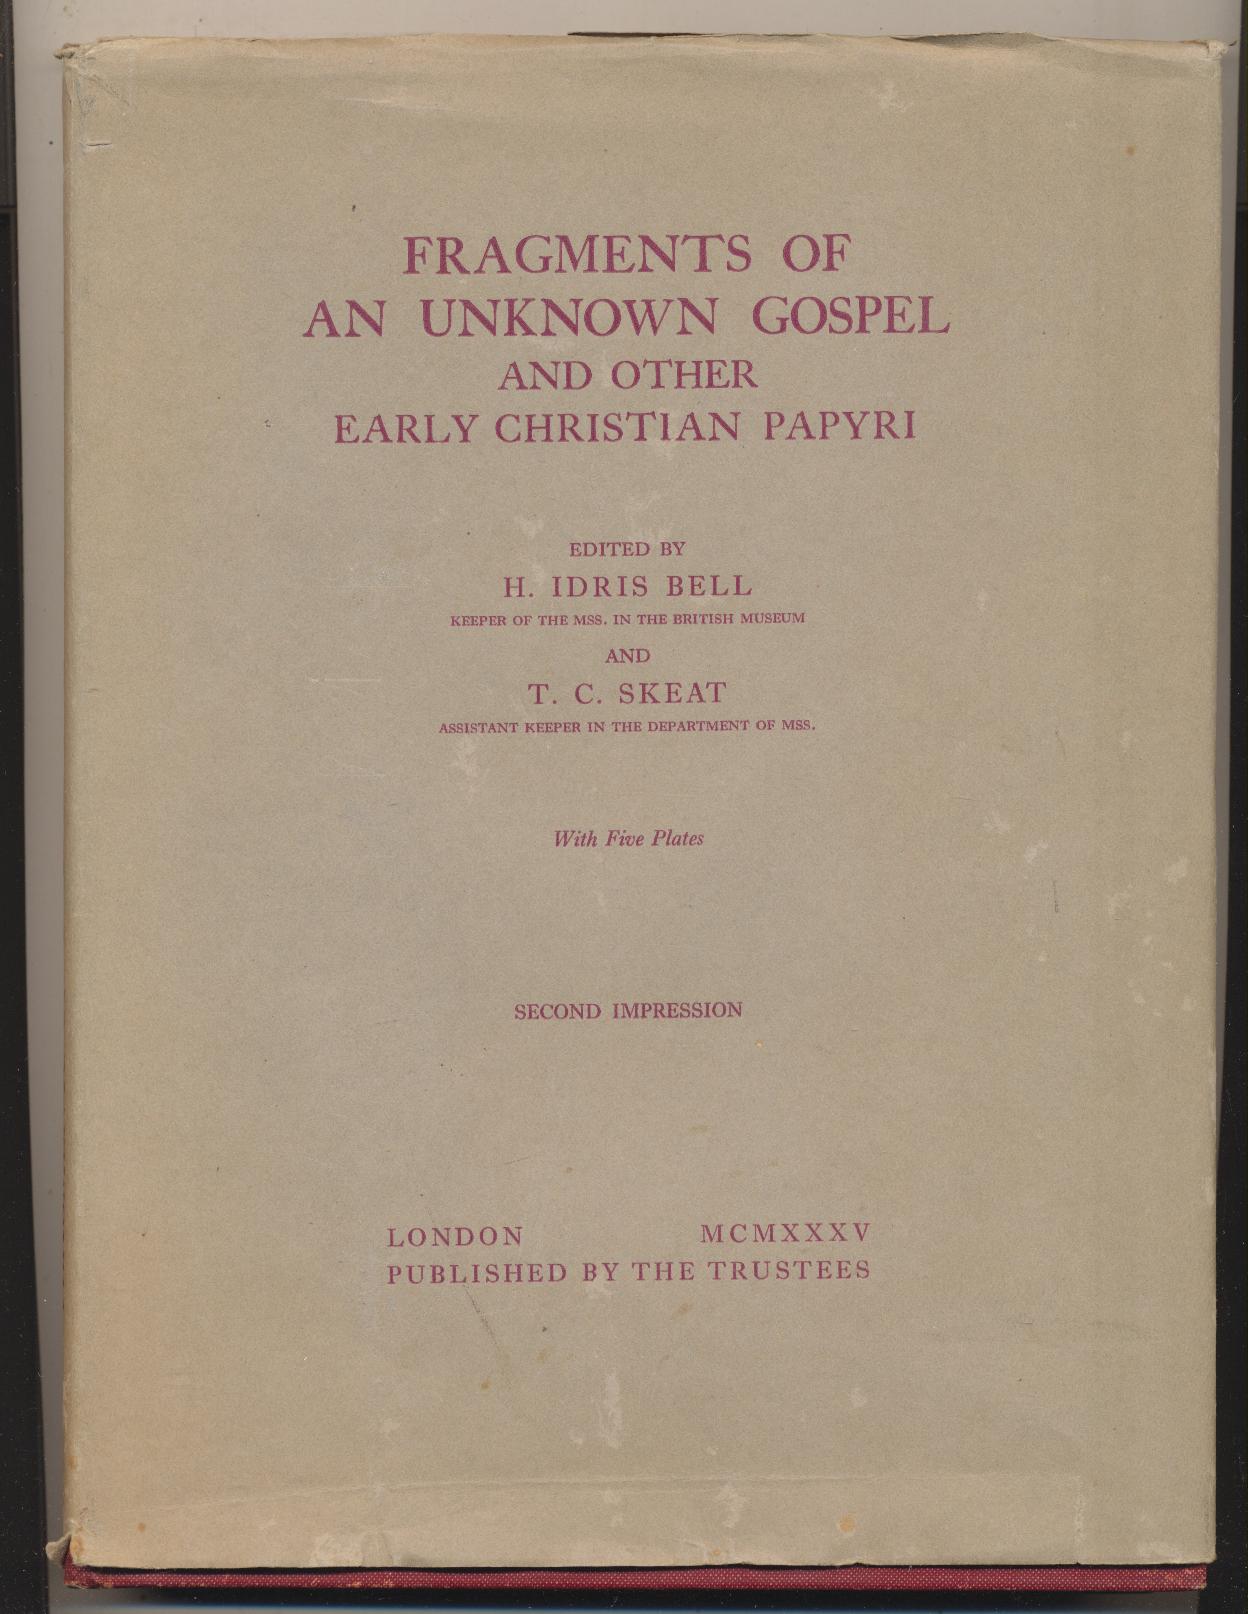 Fragments of an unknown gospel and other early Christian papiry. London 1935